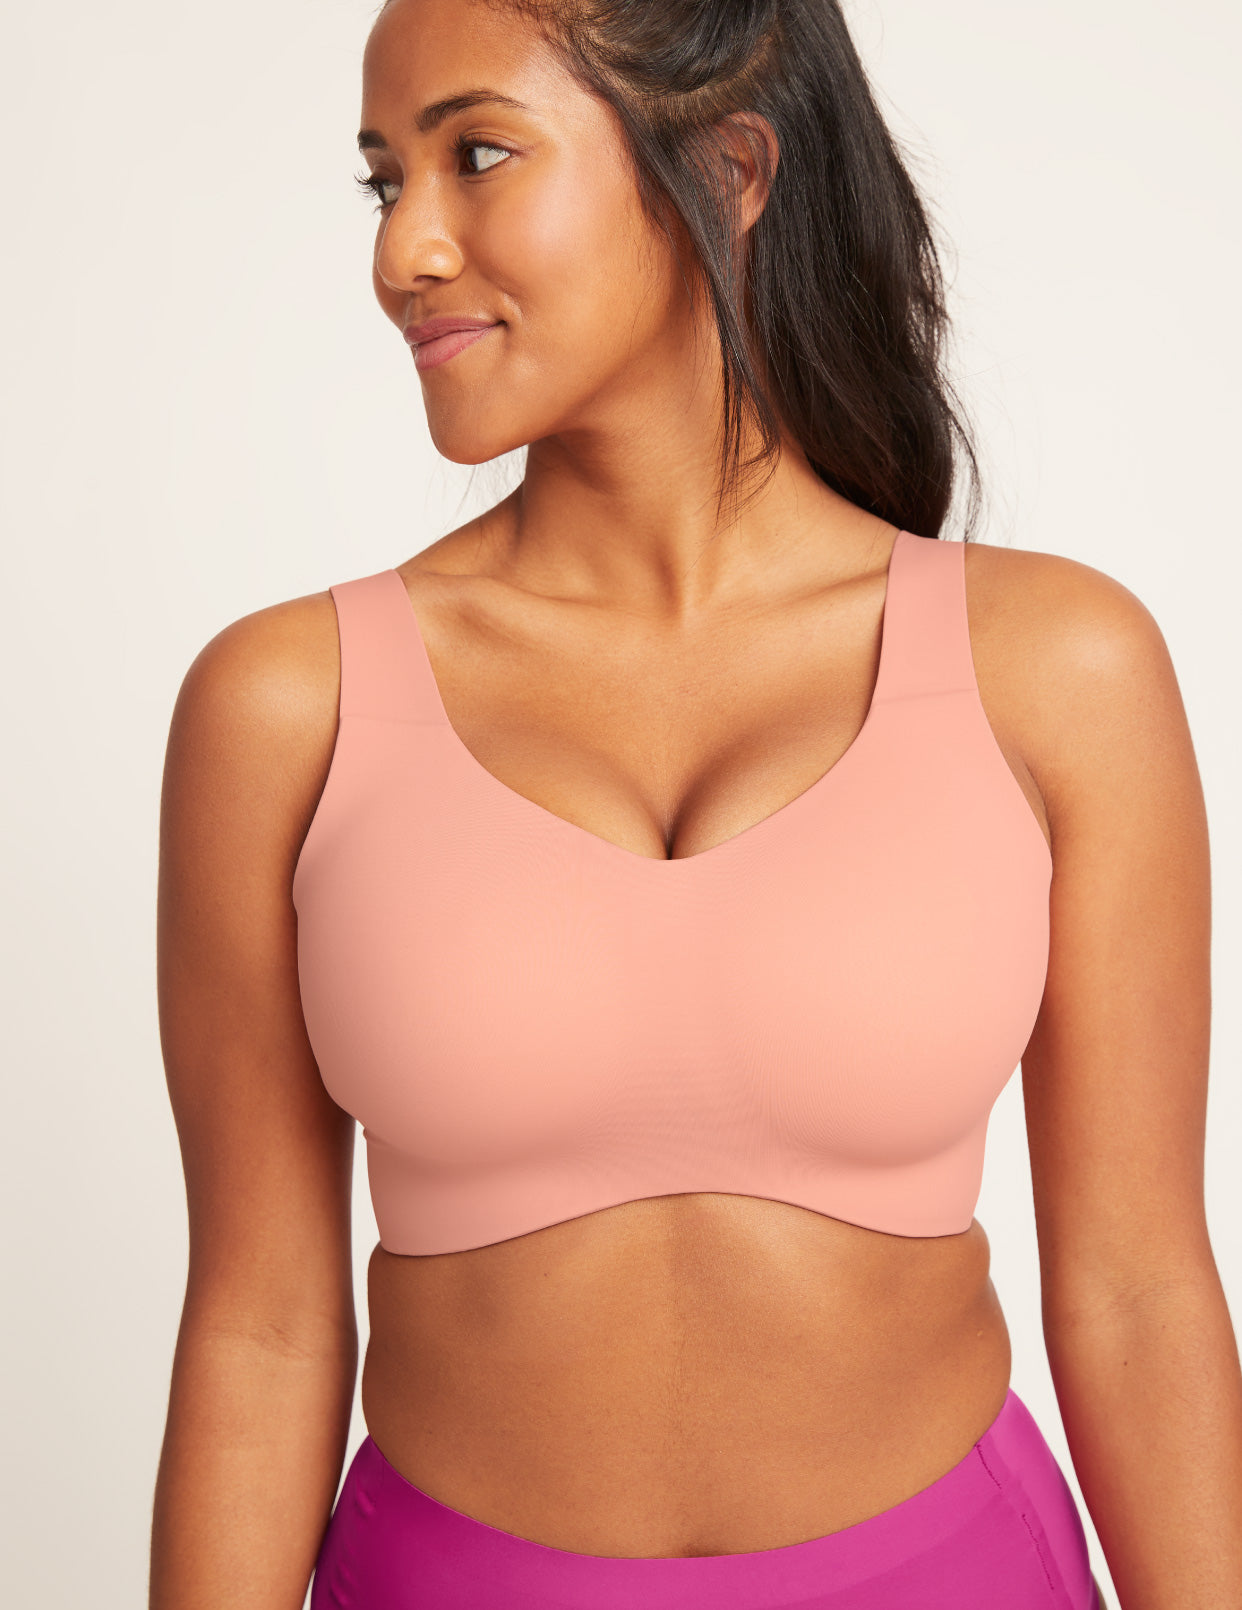 The Catalyst Best High Impact Sports Bra For Support And Comfort · Knix 